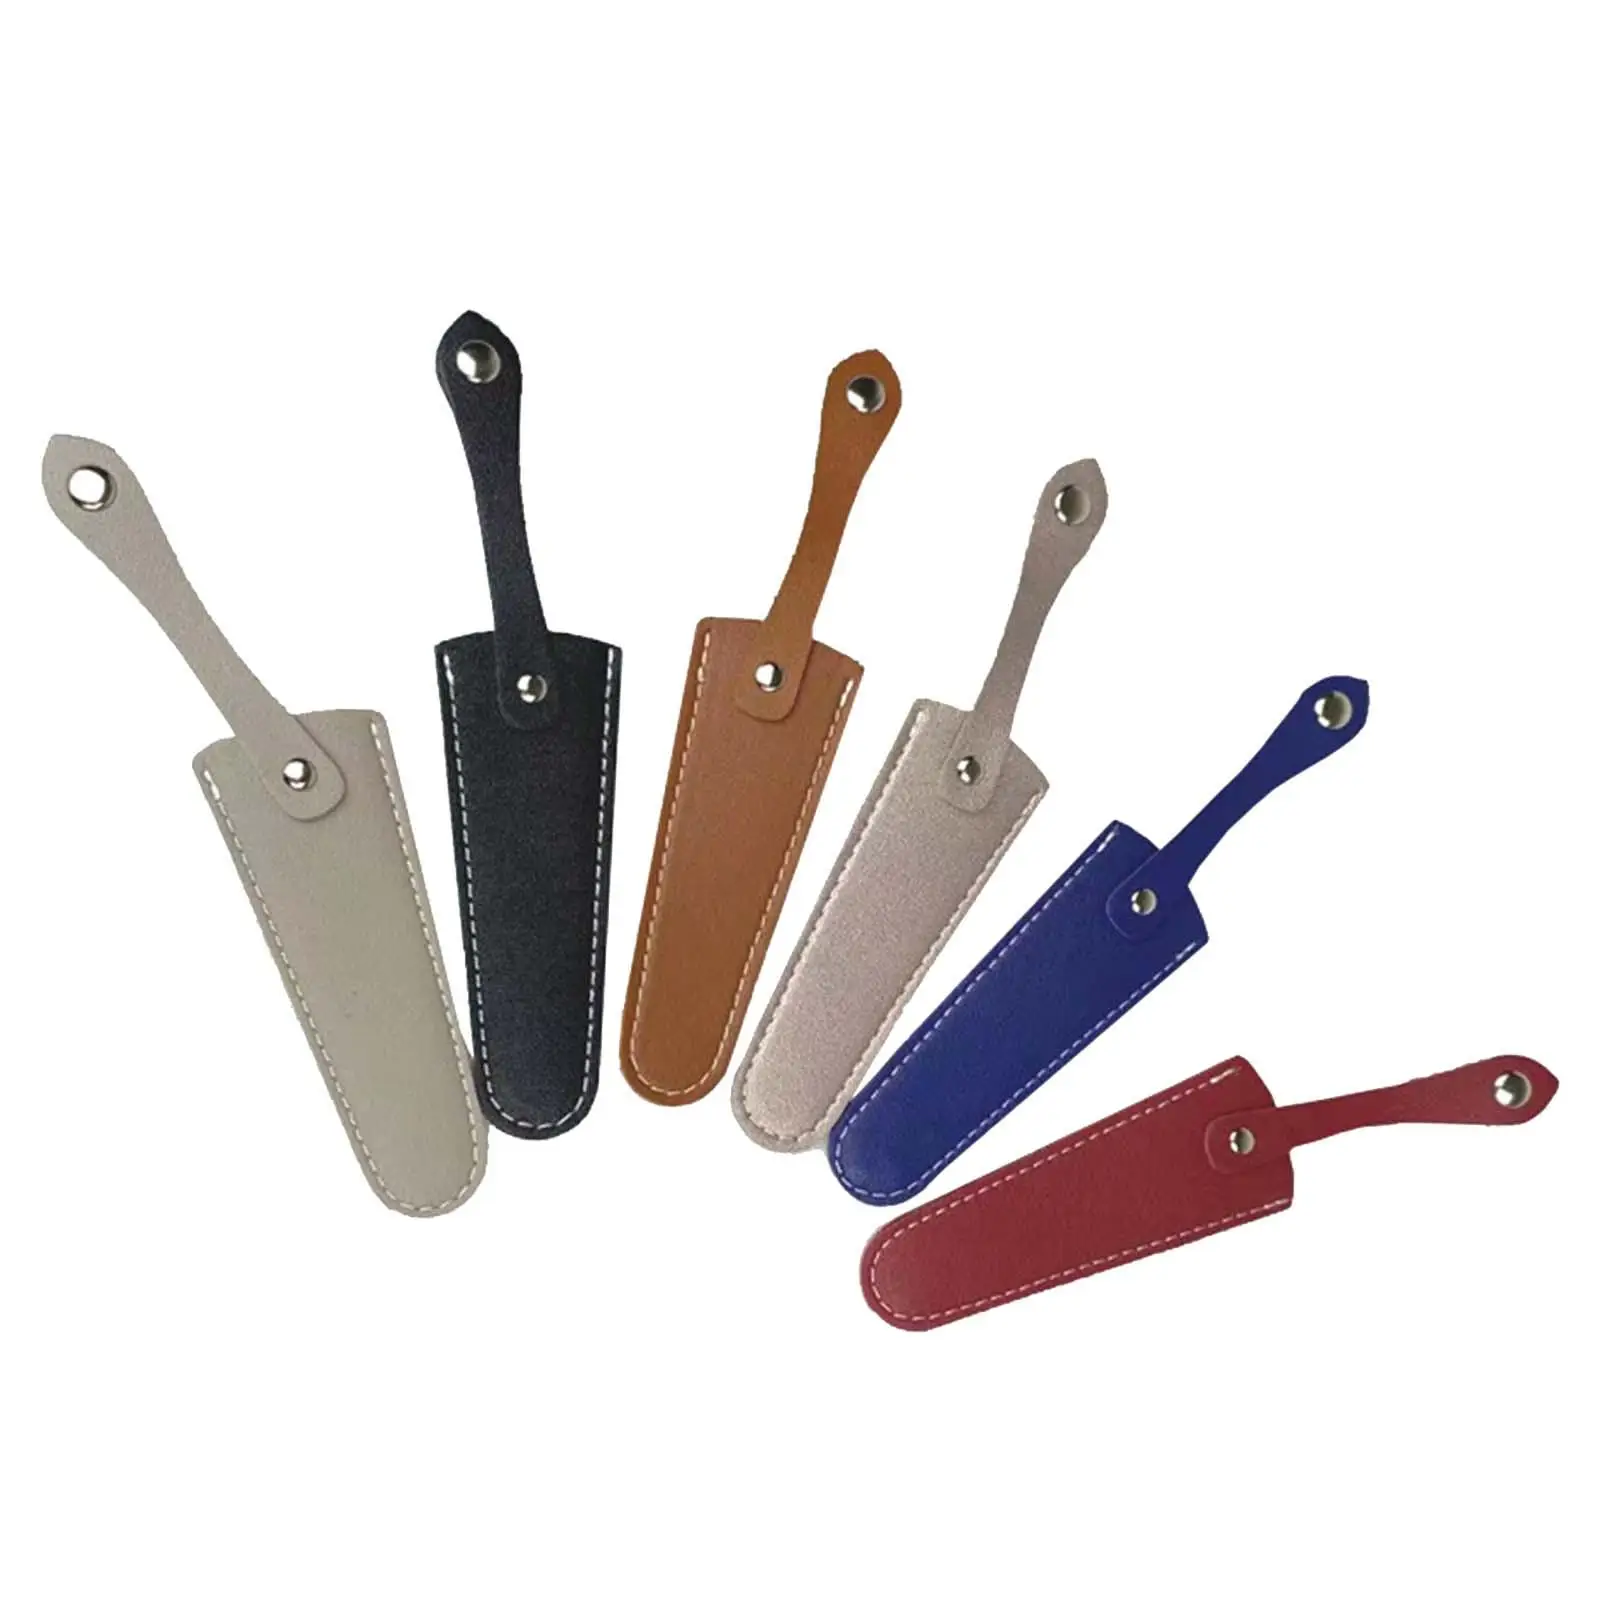 6Pcs Sewing Scissor Sheath Scissors Cover Protector for Embroidery Stylist